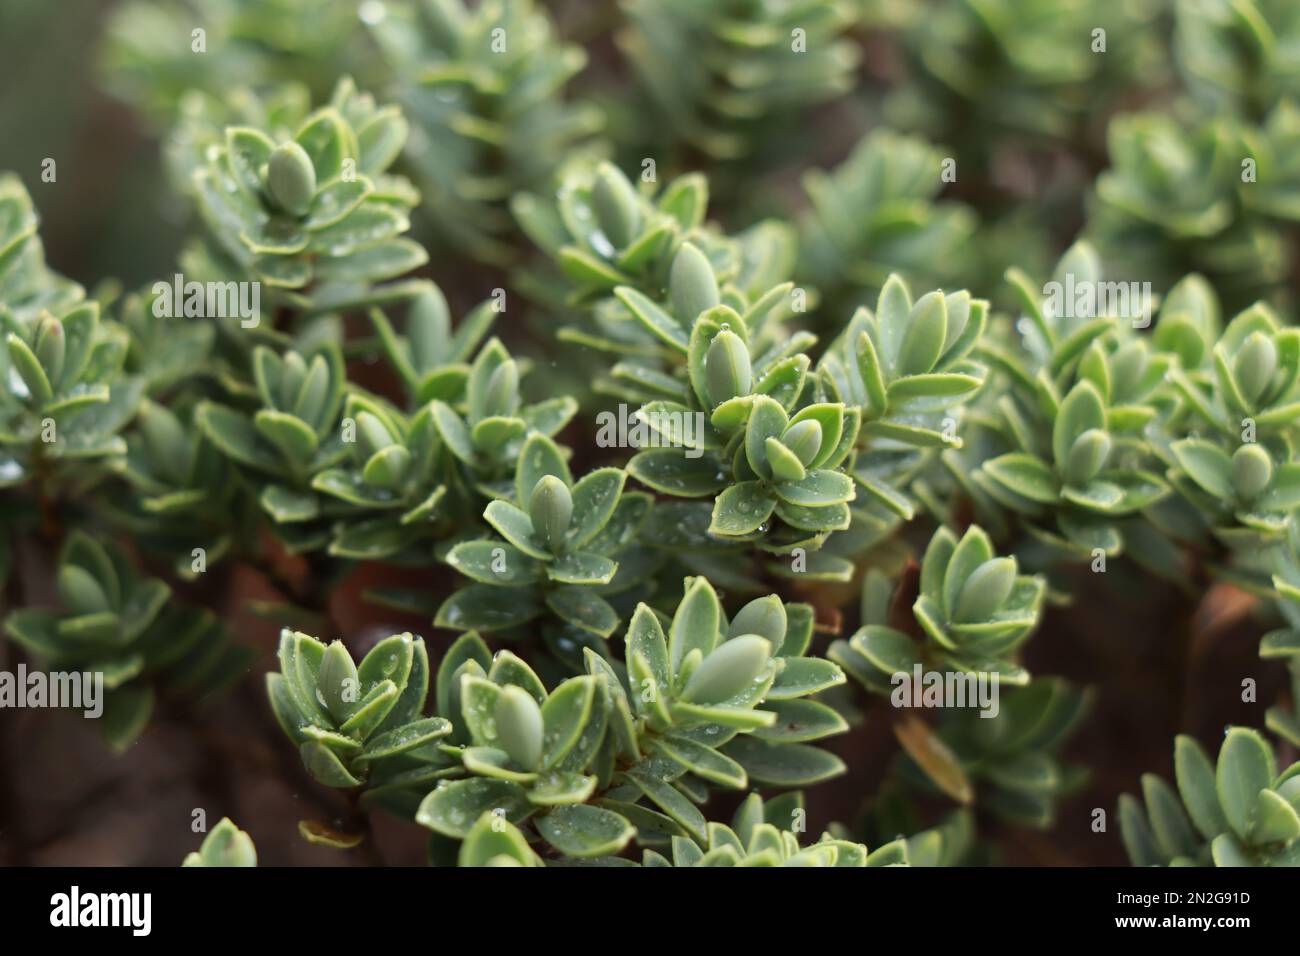 Evergreen plant Hebe with pale, fine leaves.Callitrichaceae Evergreen. Plantaginaceae Stock Photo